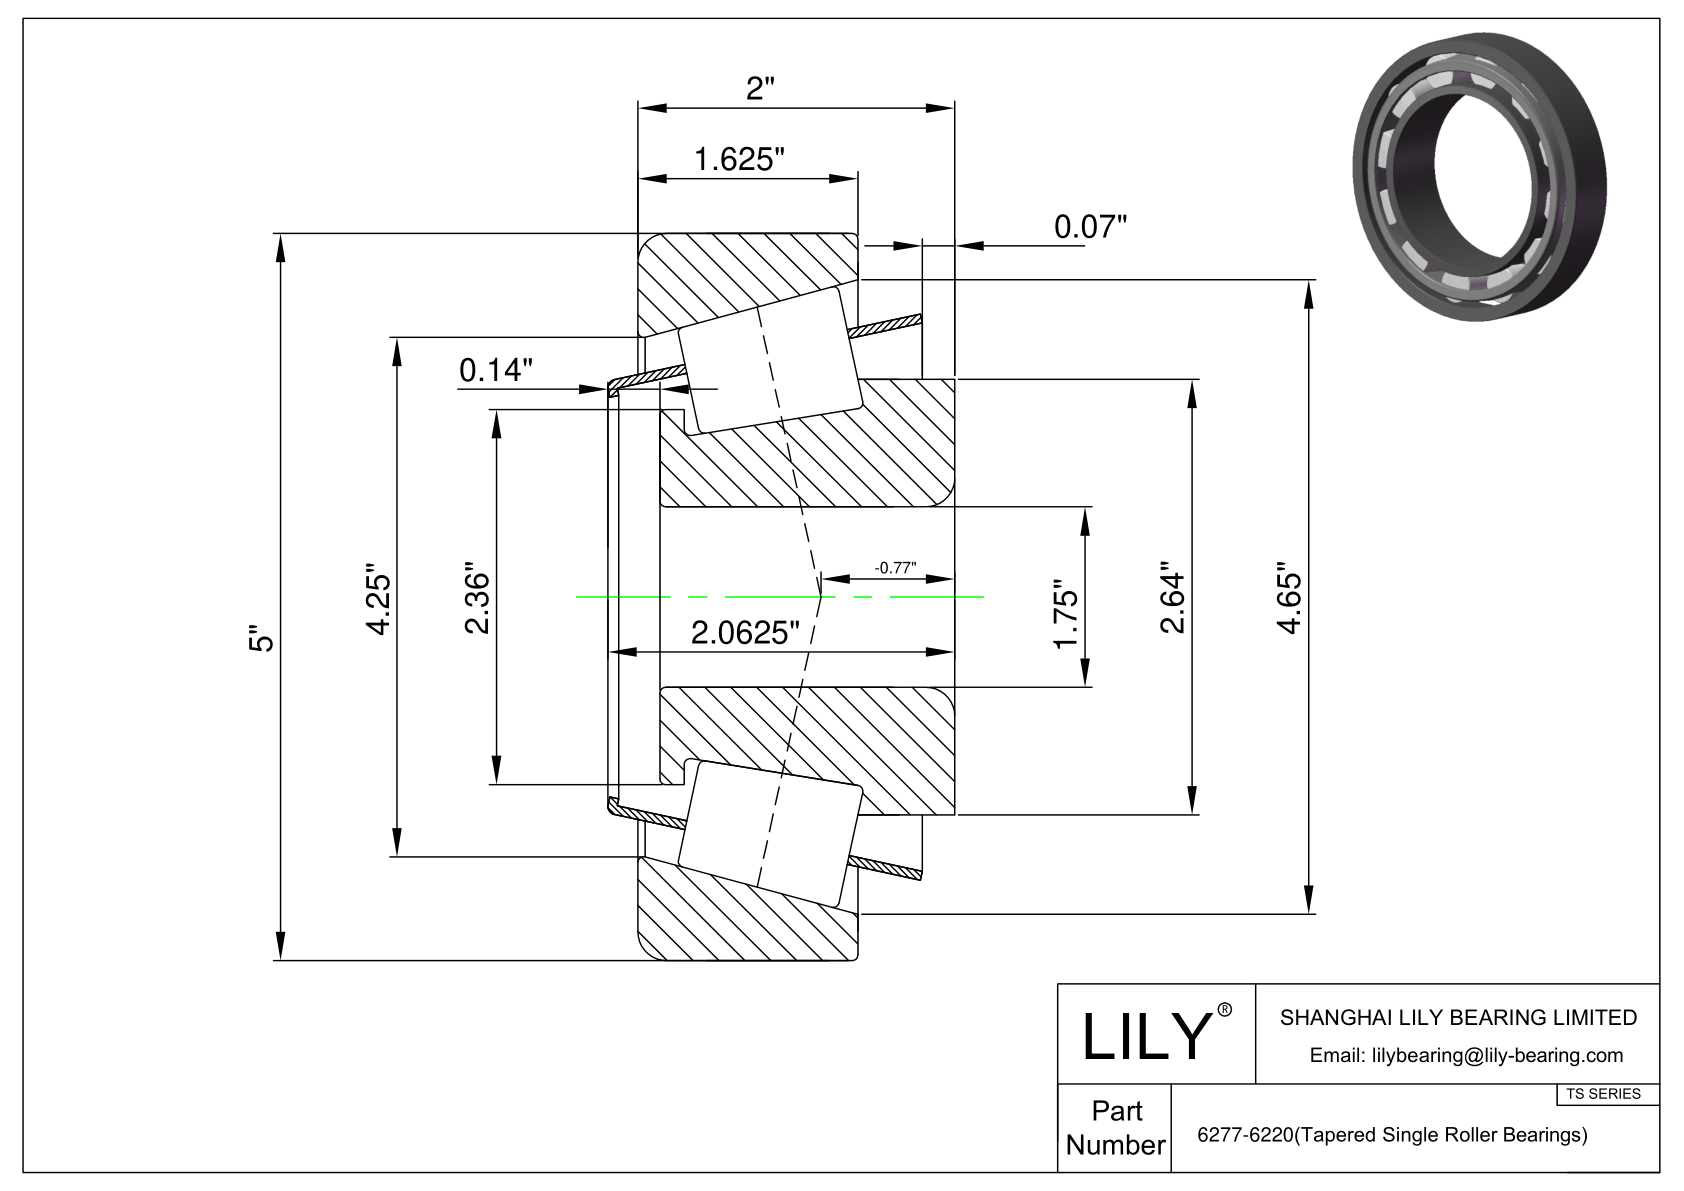 6277-6220 TS (Tapered Single Roller Bearings) (Imperial) cad drawing